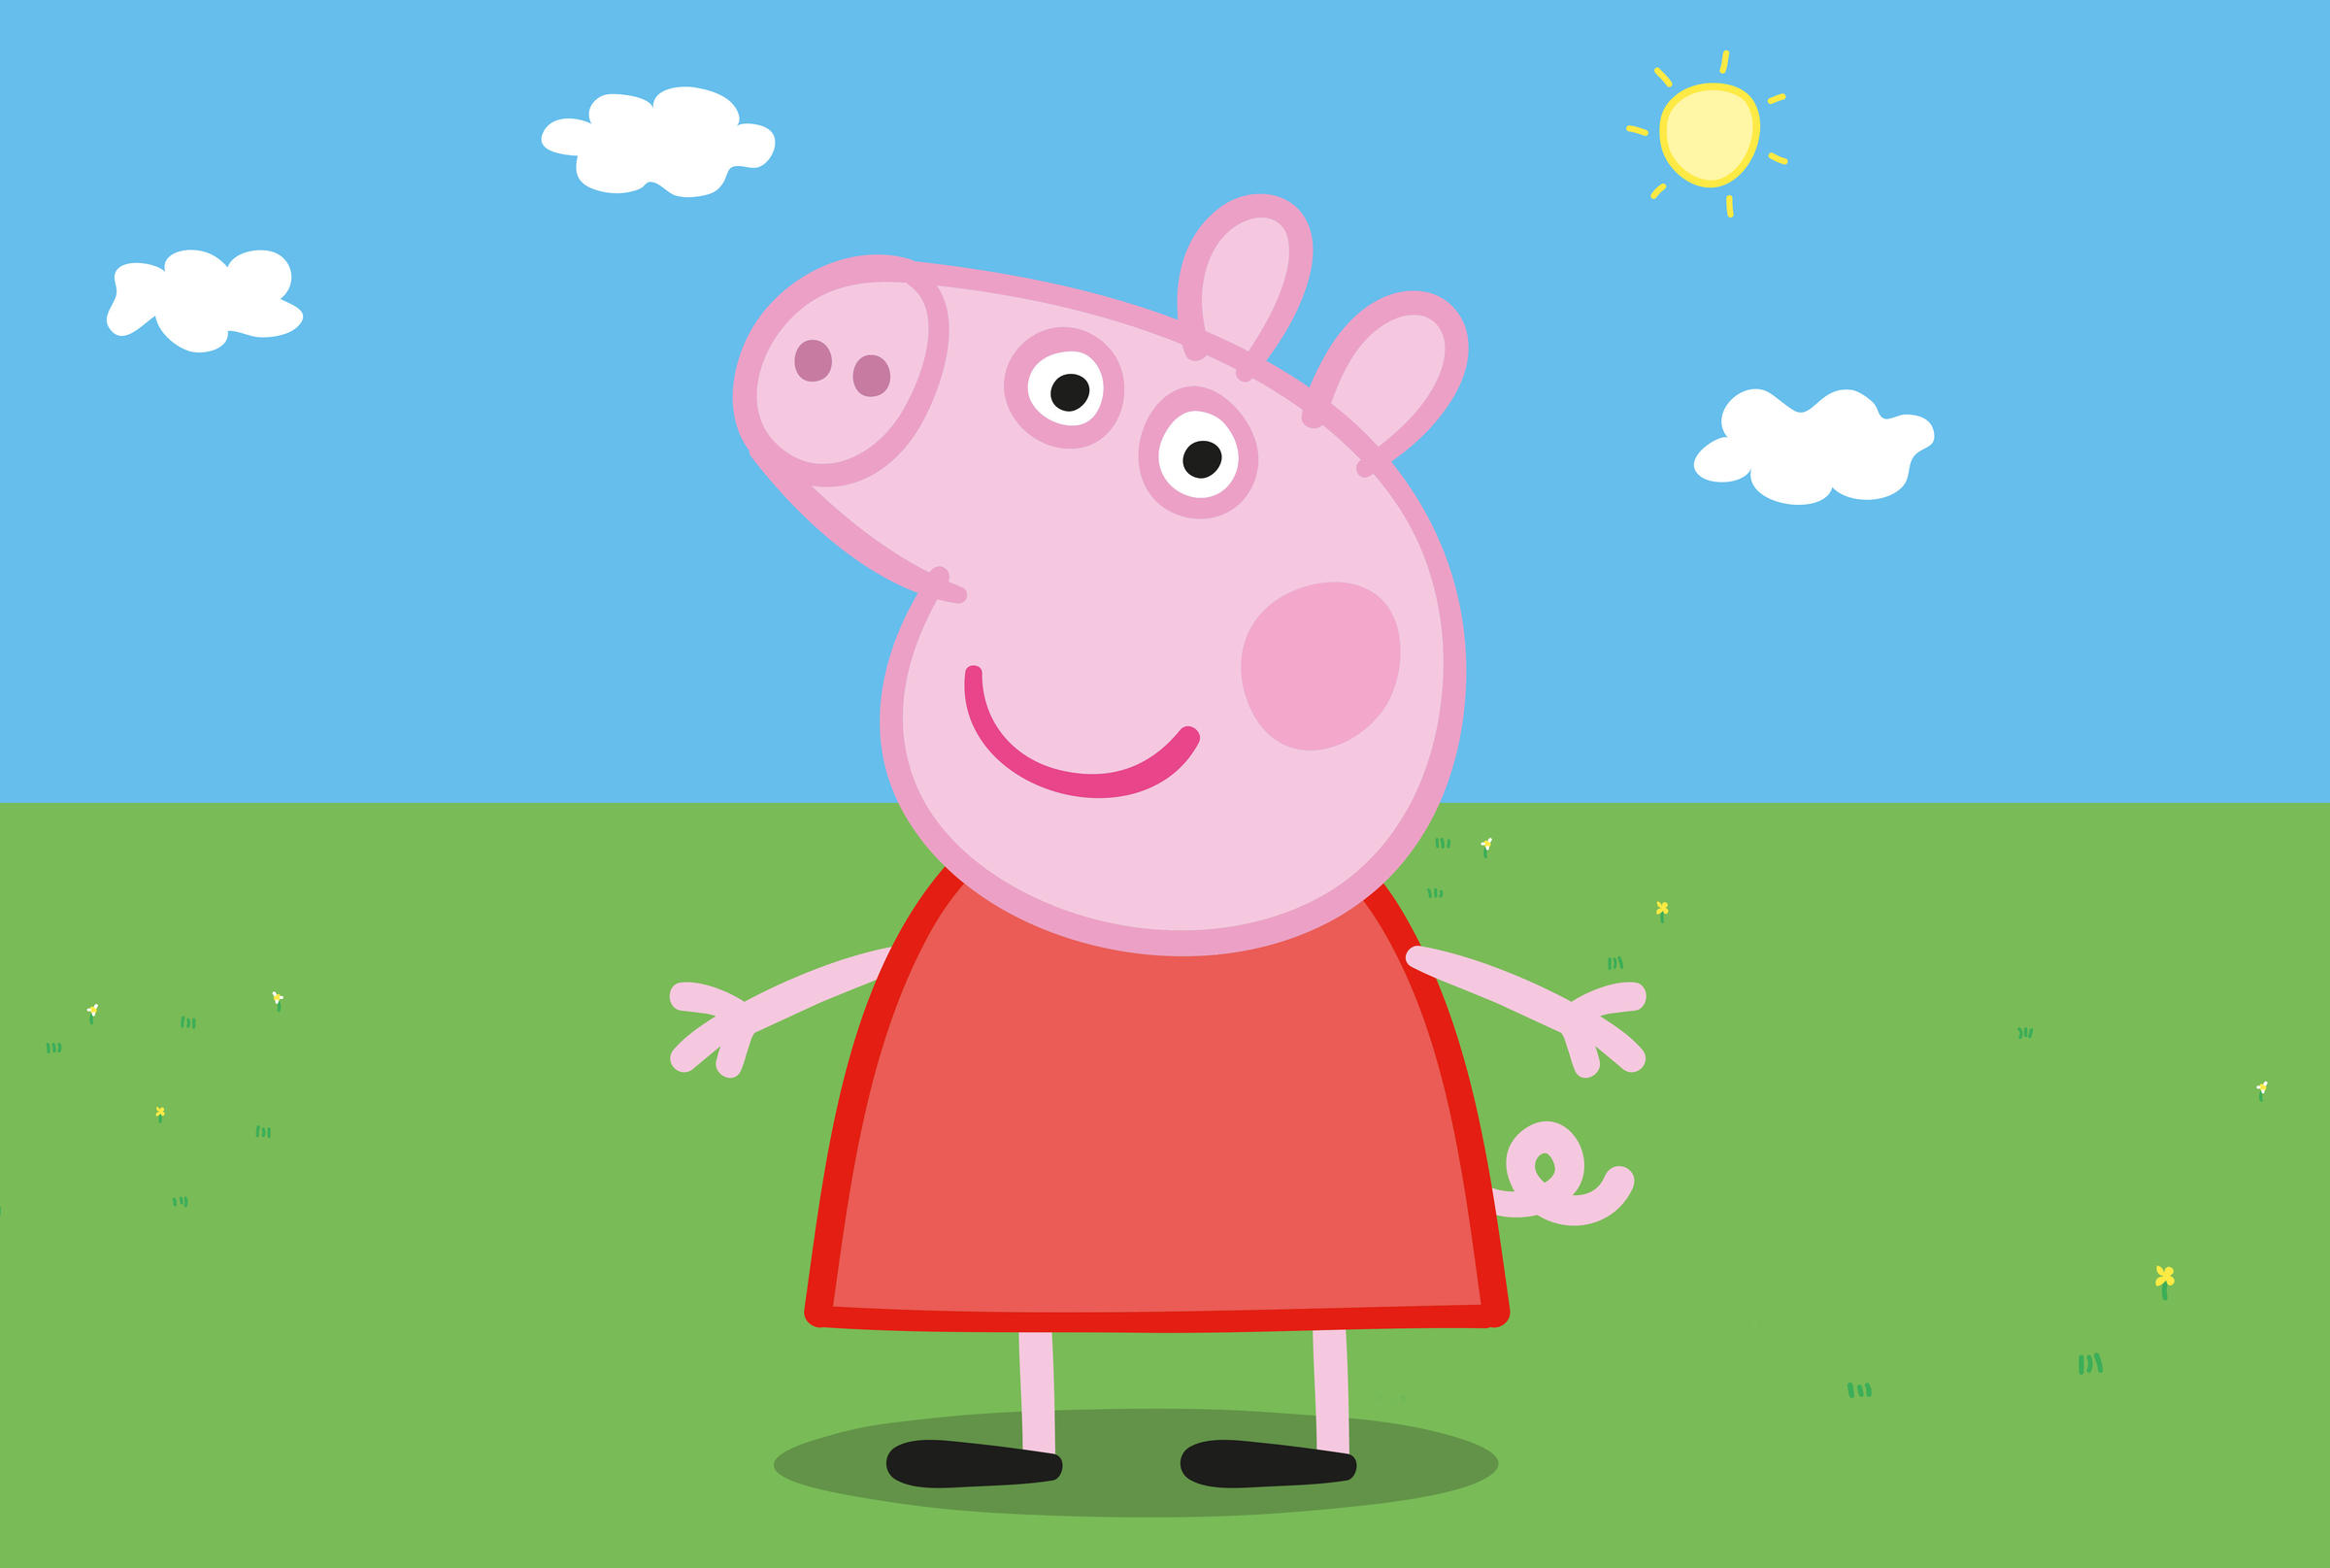 queue-up-your-preschool-playlist-peppa-pig-has-just-dropped-my